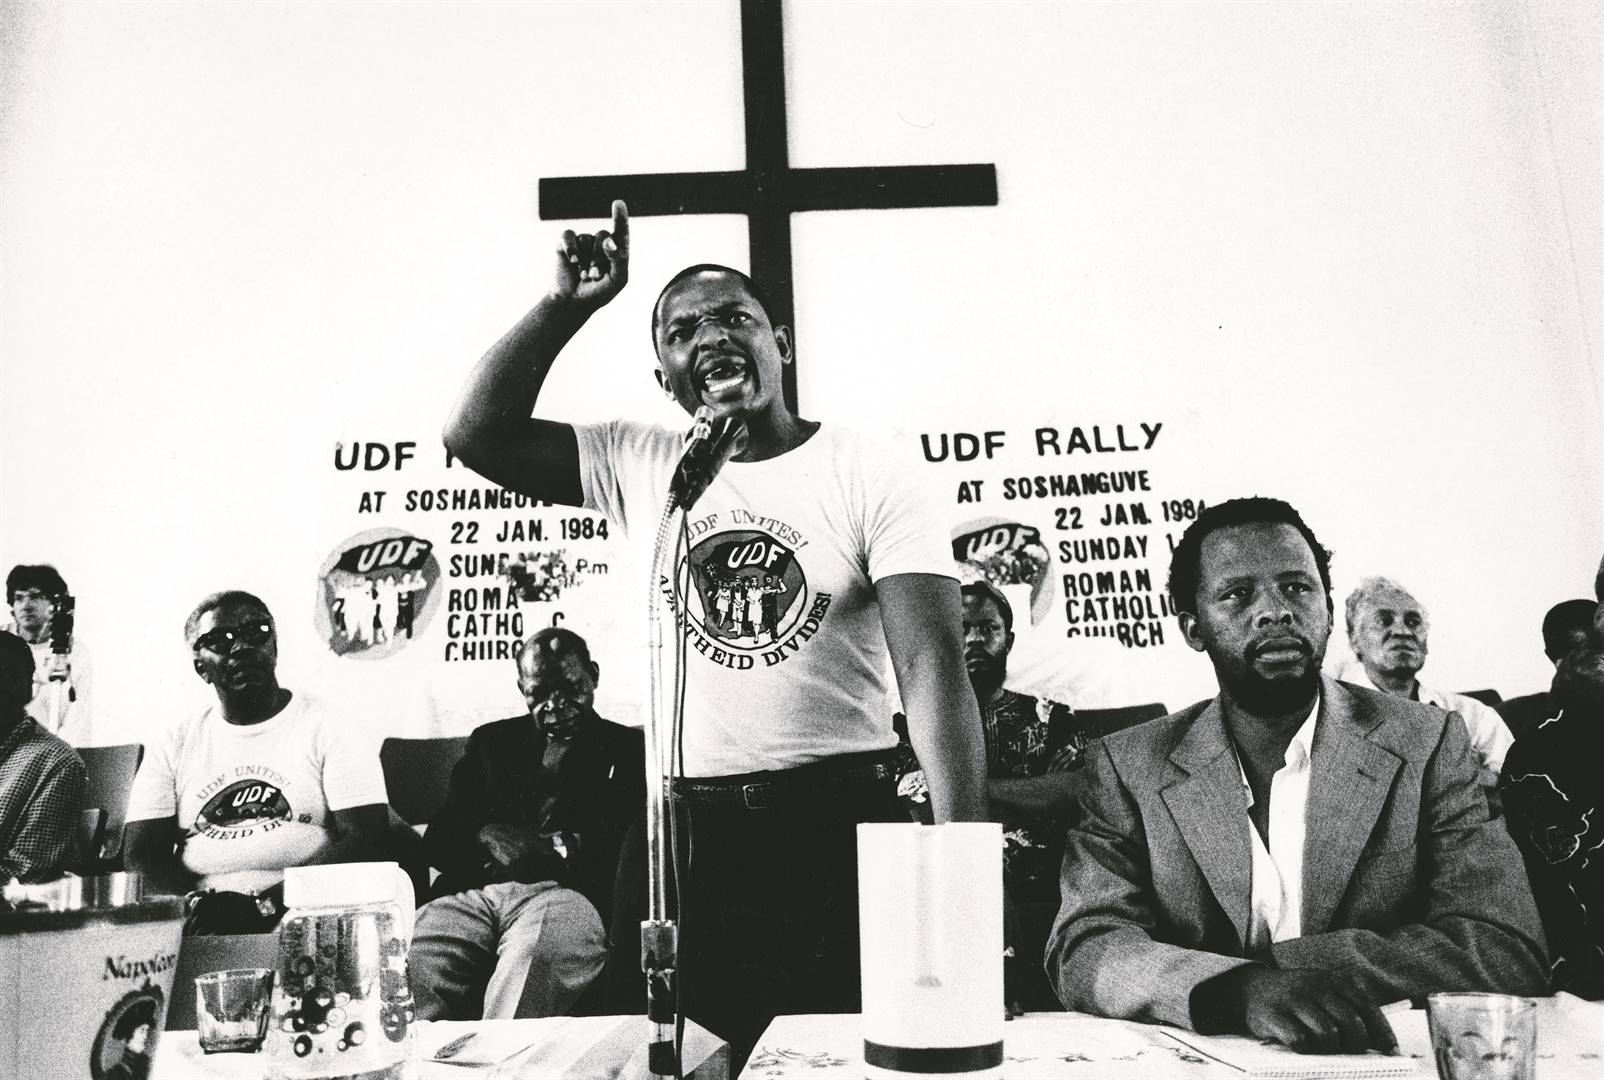 Addressing a crown in Soshanguve in 1984 is the young fiery Mosiuoa Lekota who was then known by his nickname Terror, frightened the apartheid apparatus